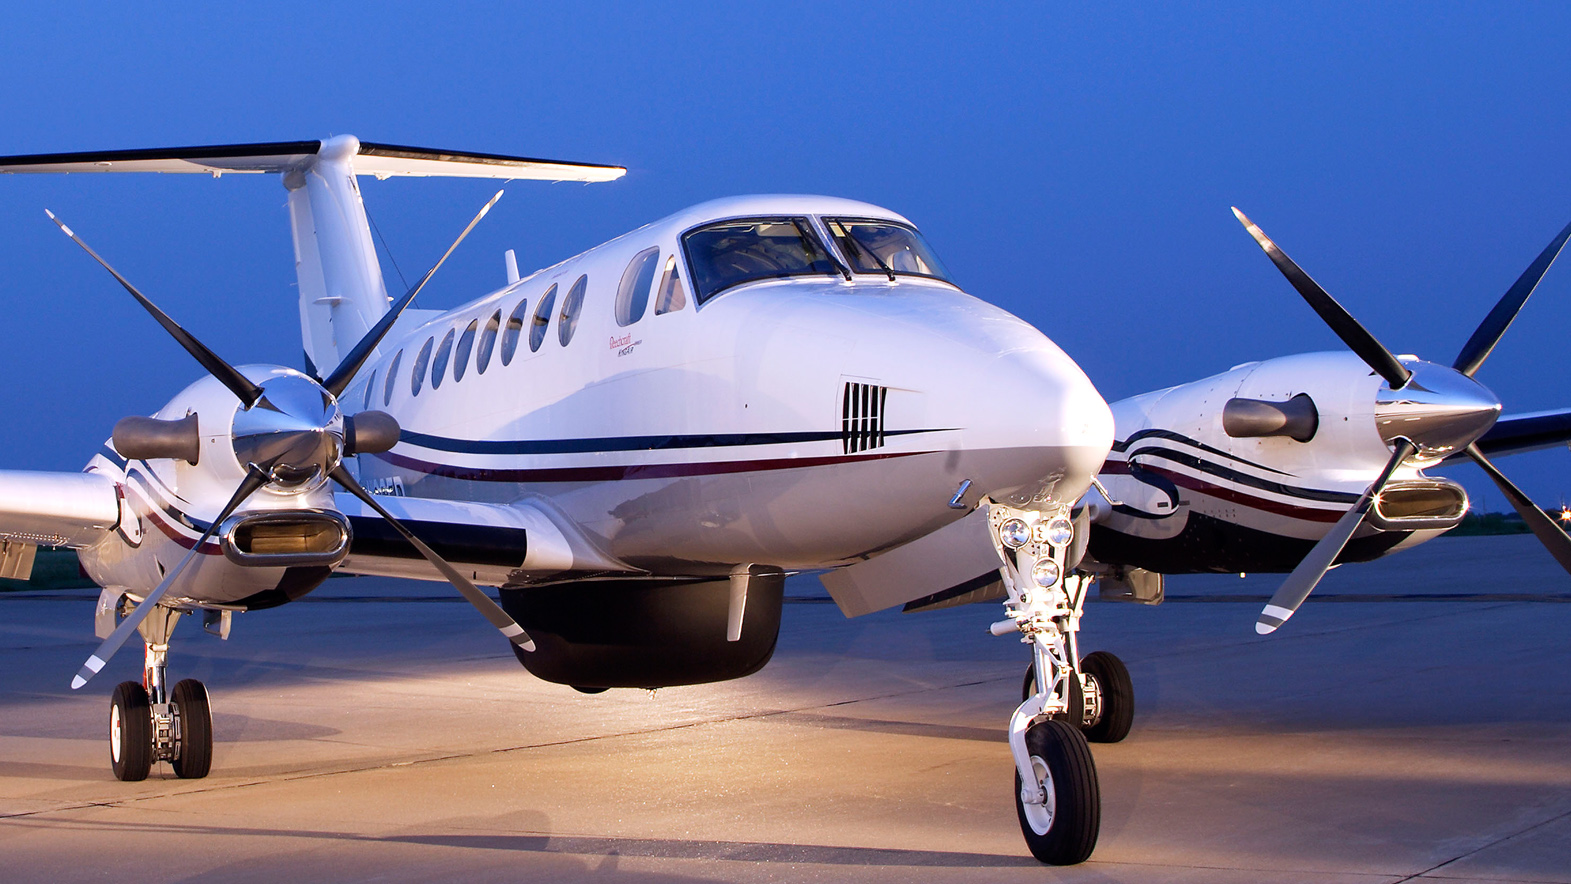 ROUNDTRIP PRIVATE JET AND HOTEL STAY IN LAS VEGAS for 7